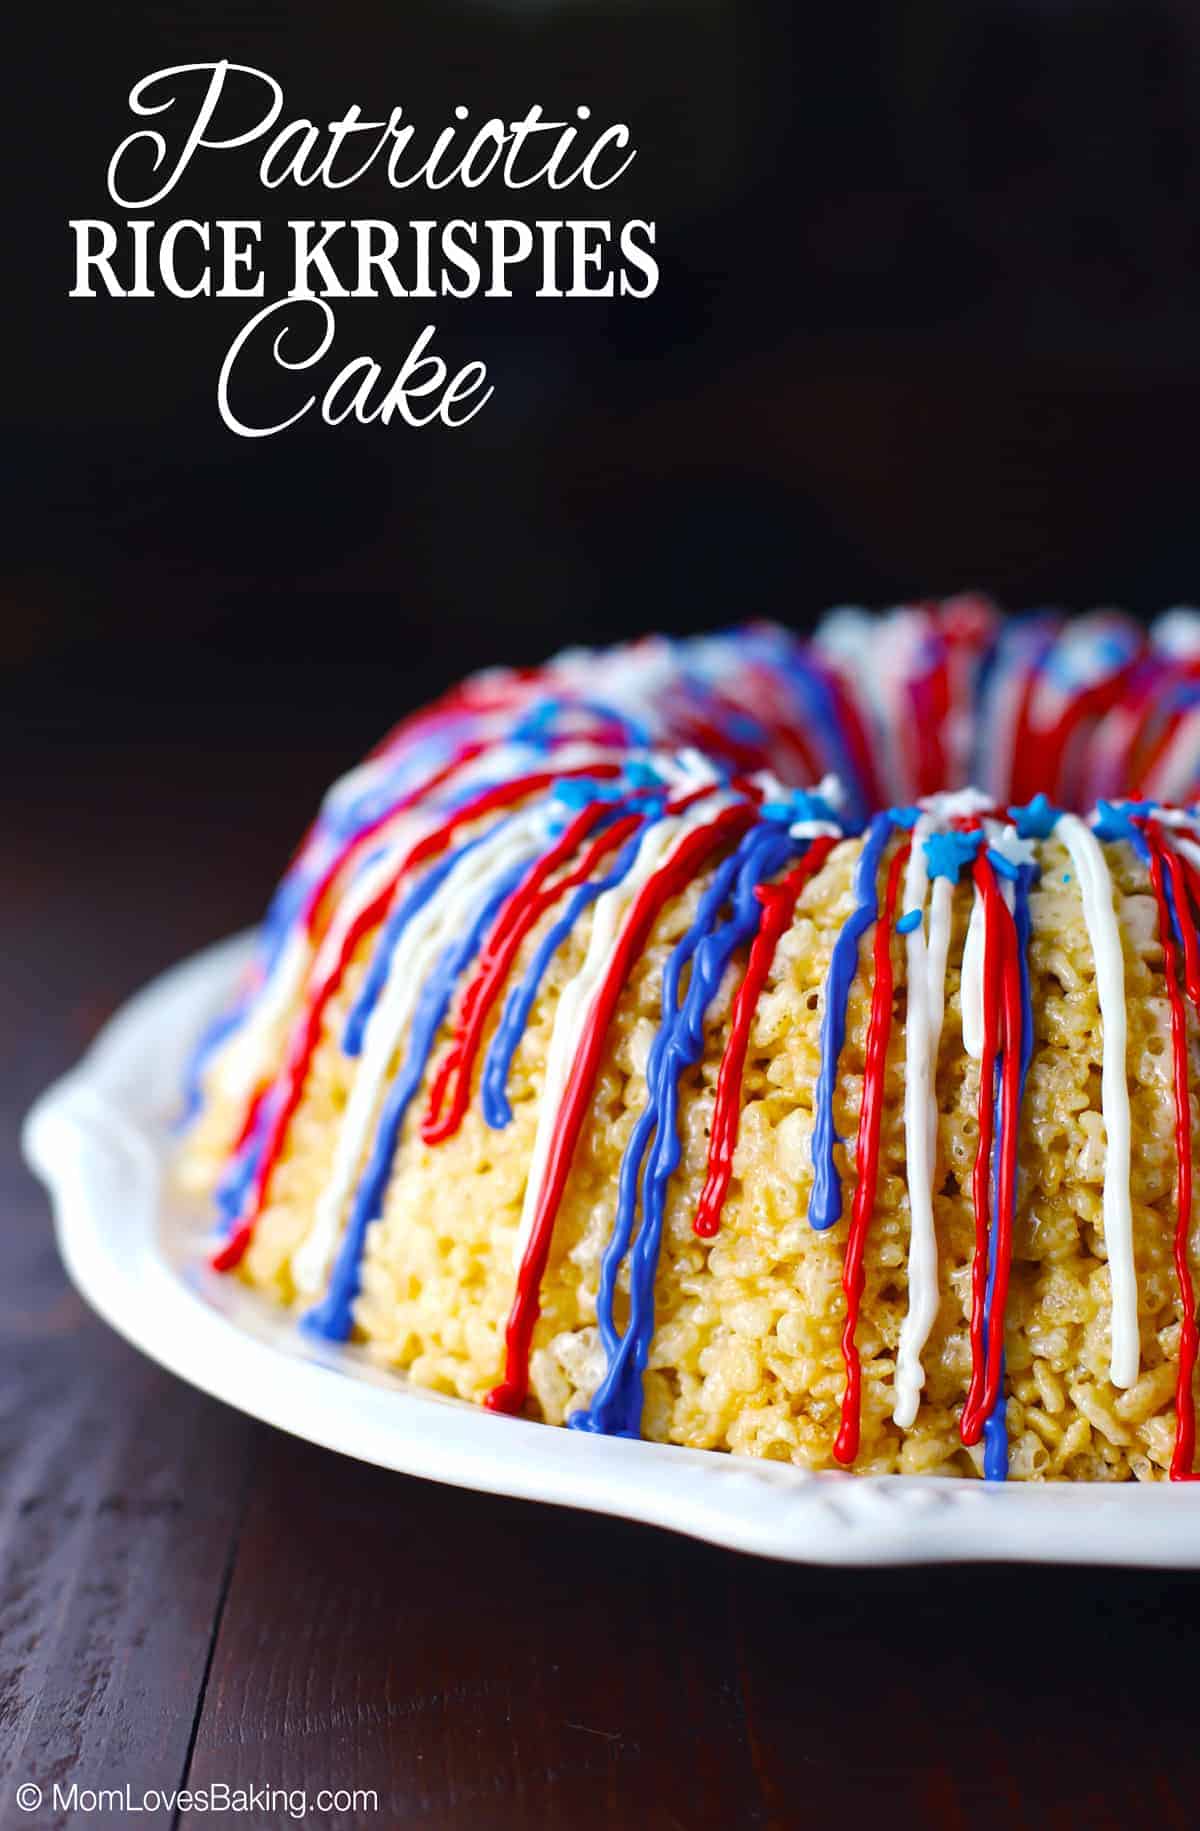 Bundt shaped rice krispies cake with candy melt drizzles in red, white and blue.